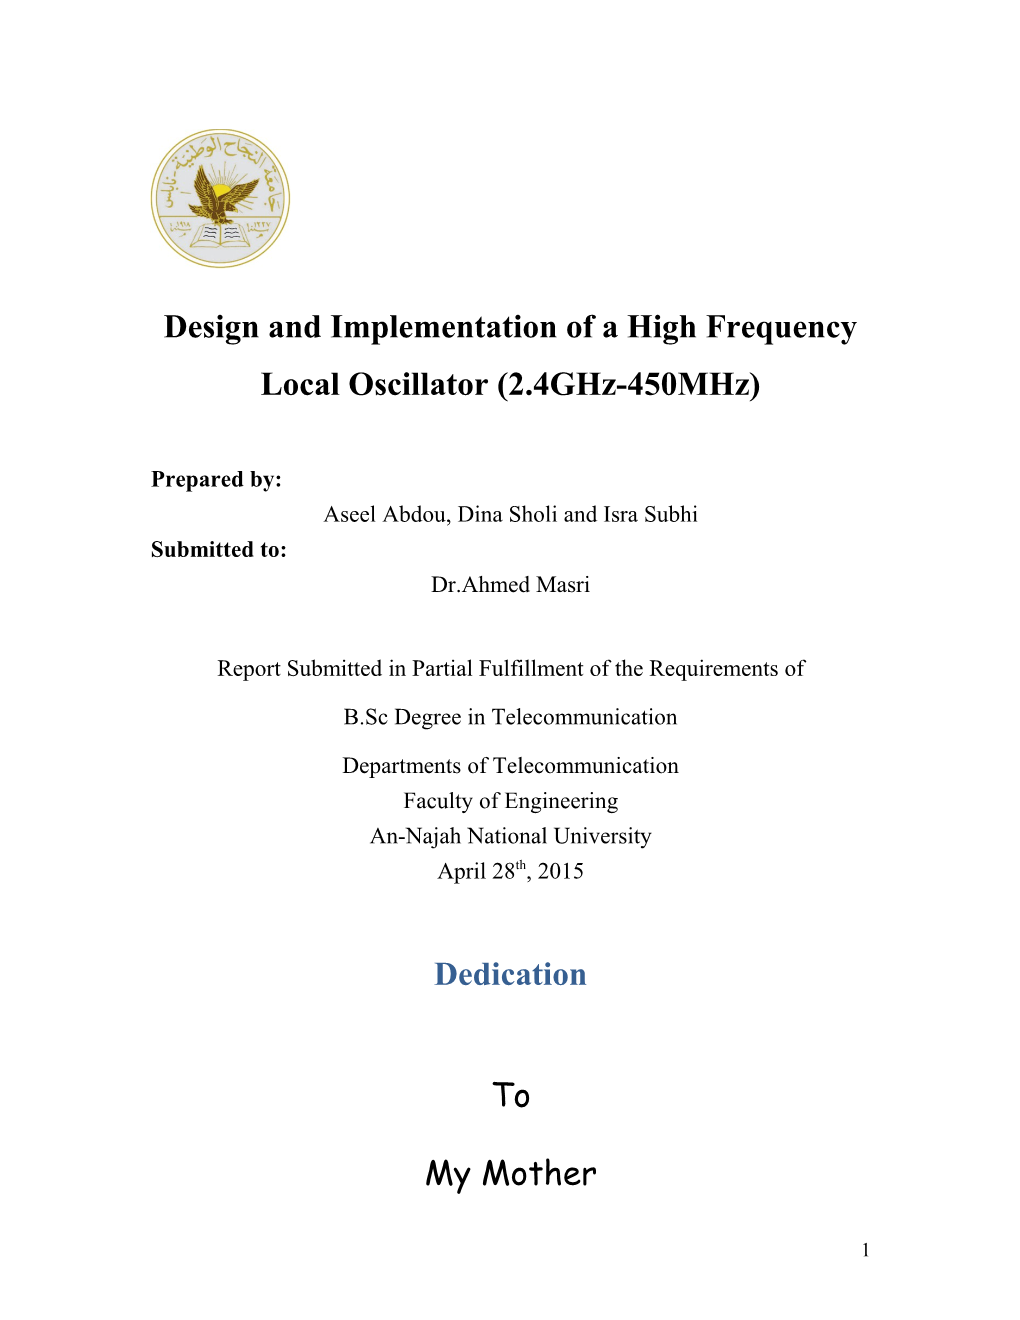 Design and Implementation of a High Frequency Local Oscillator (2.4Ghz-450Mhz)